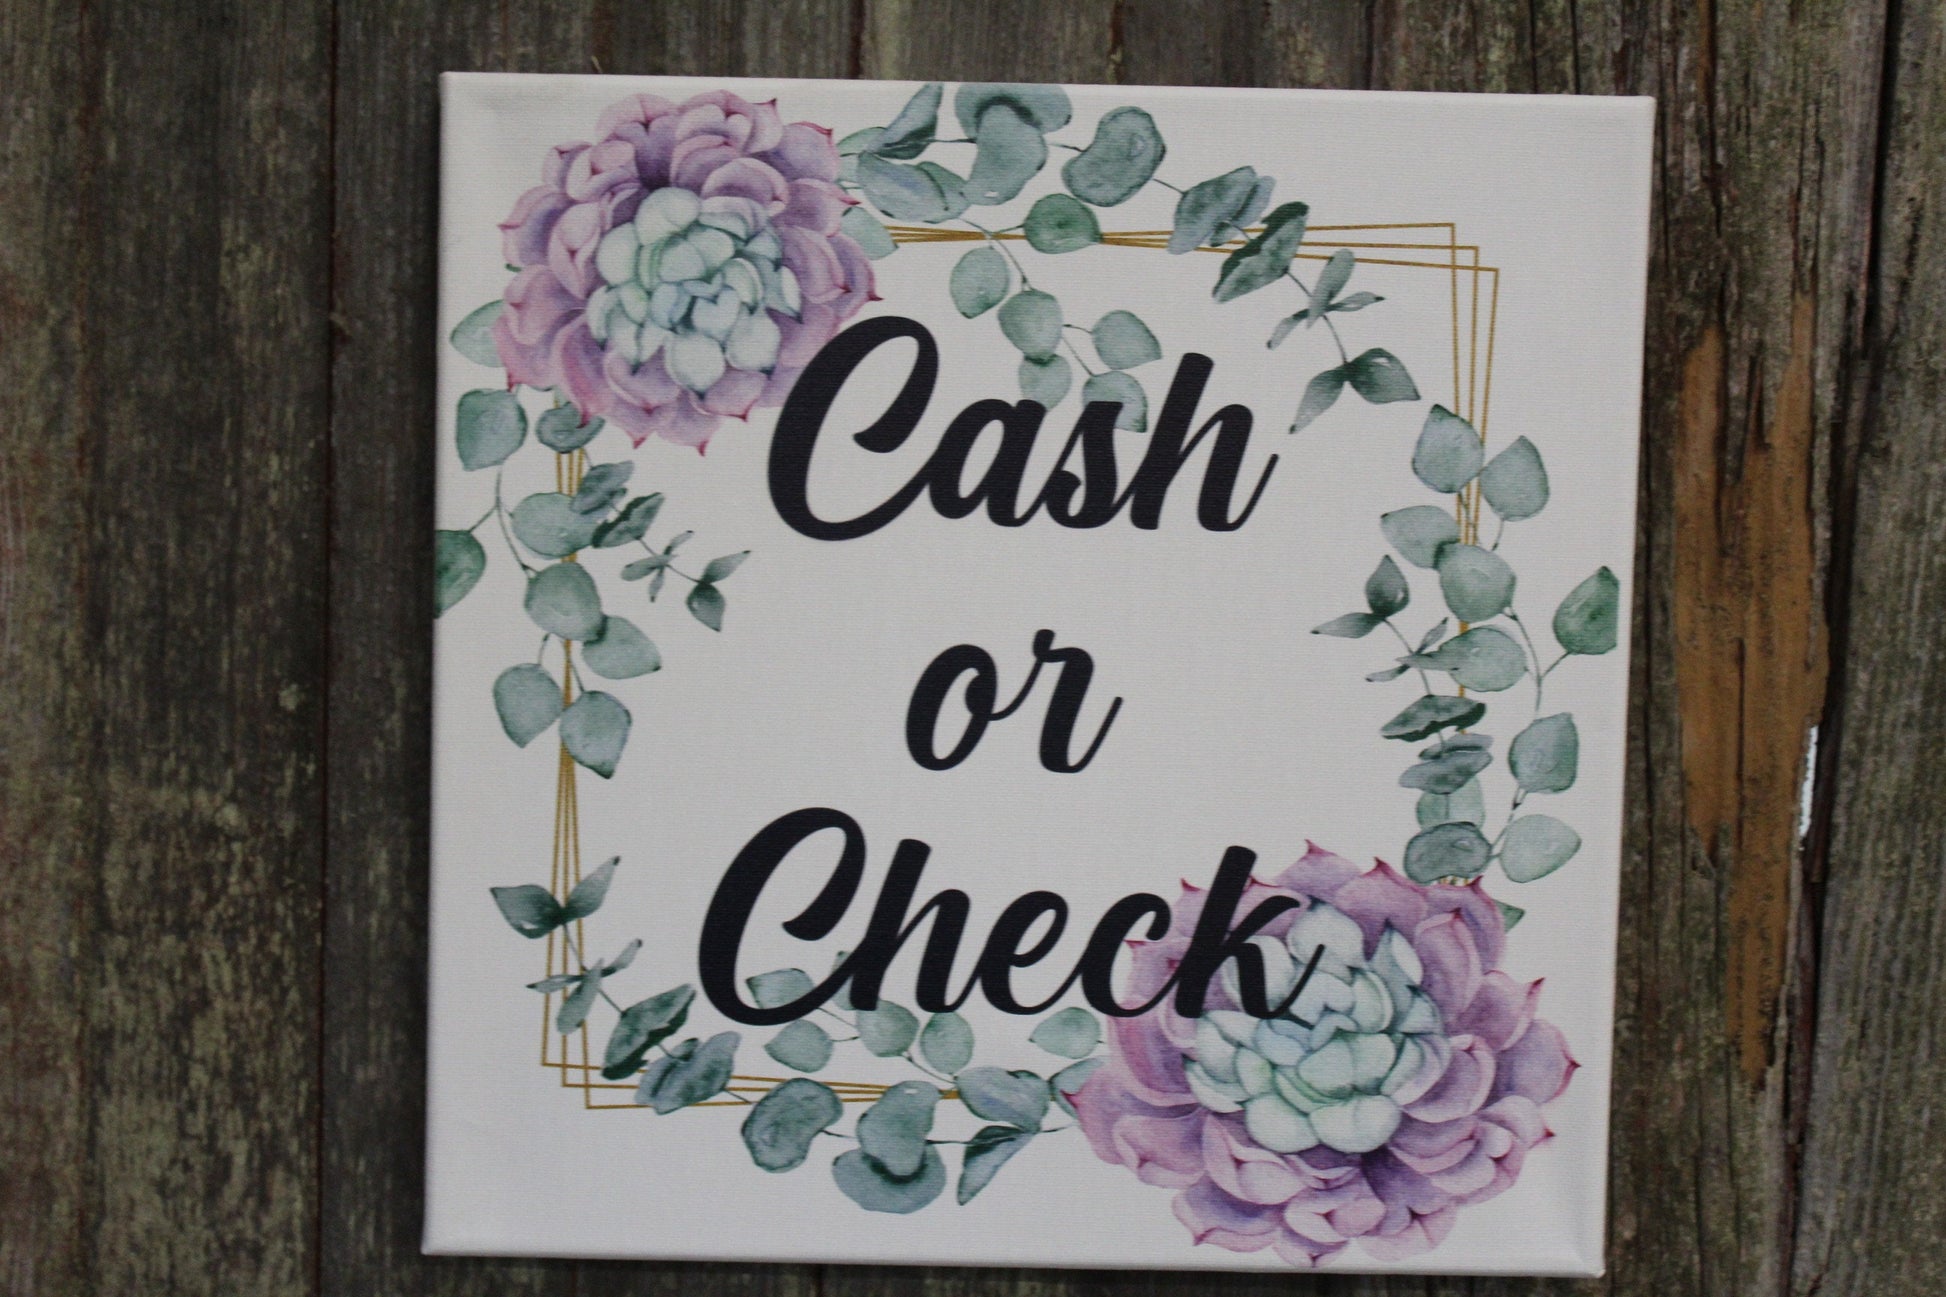 Vendor Booth Canvas Cash or Check Succulent Plants Organic Canvas Printed Sign For Small Business Craft Fair Market Signage Announcement